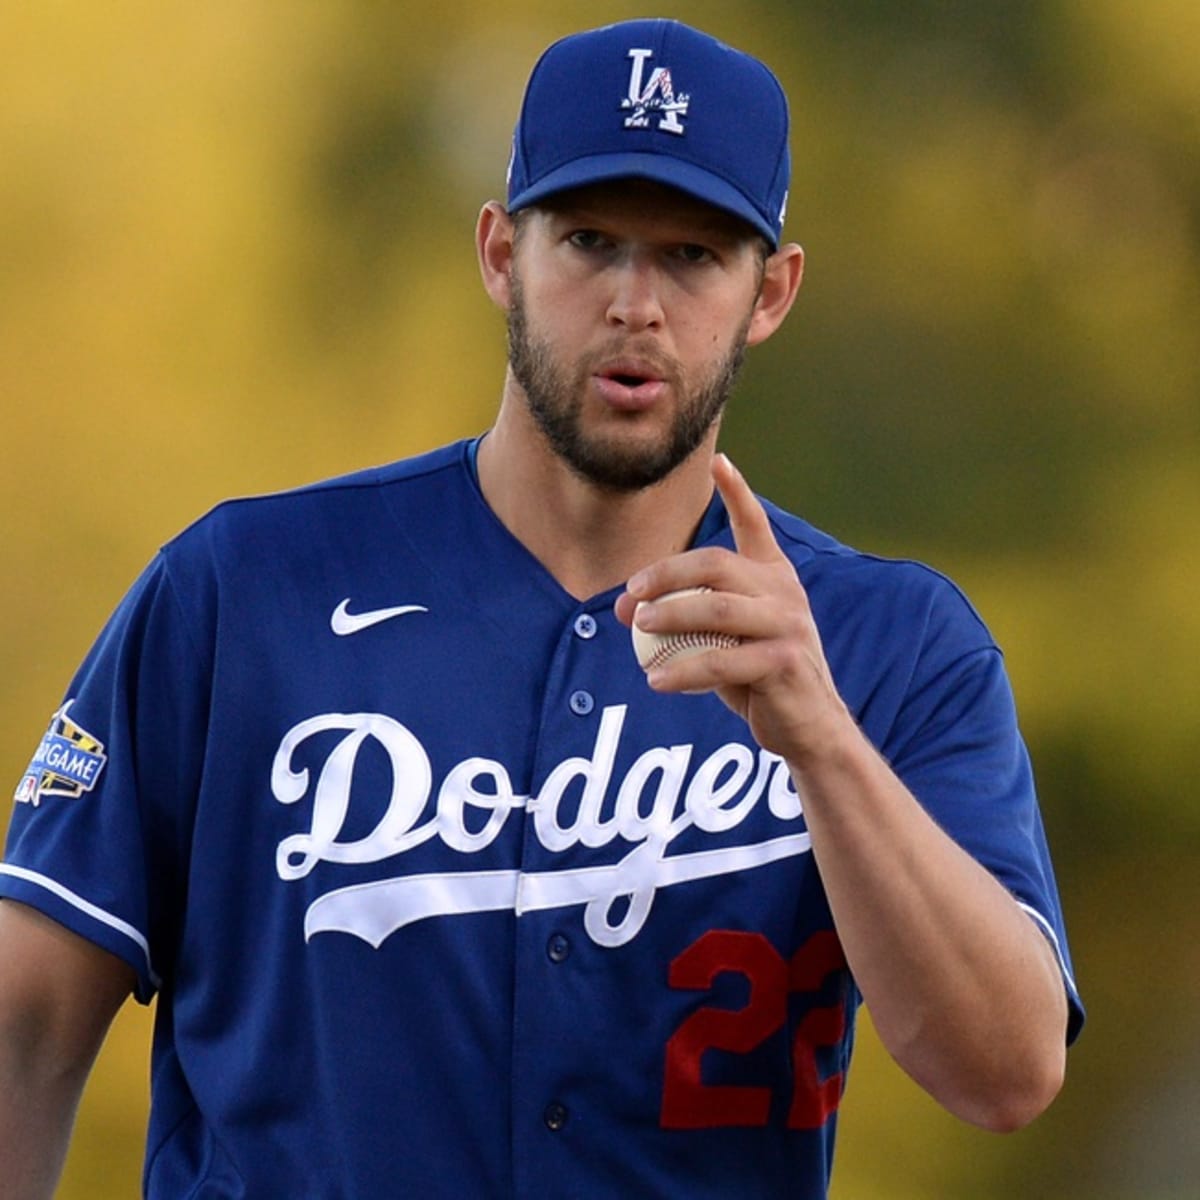 Dodgers' 2015 Spring Training schedule unveiled